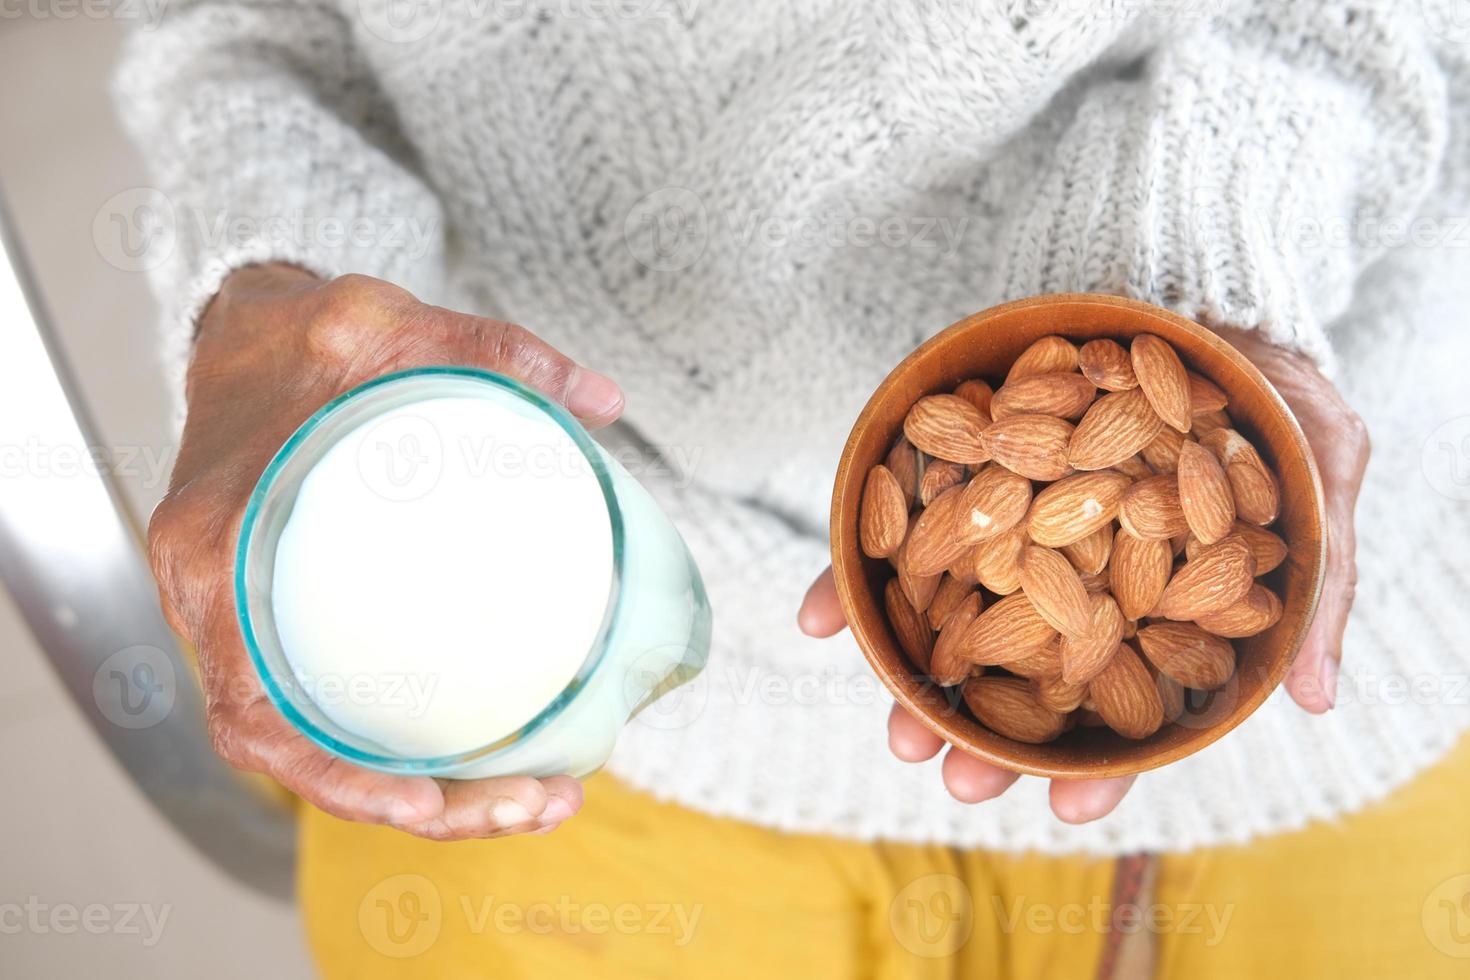 Senior woman's hand holding a bowl of almonds and glass of milk photo